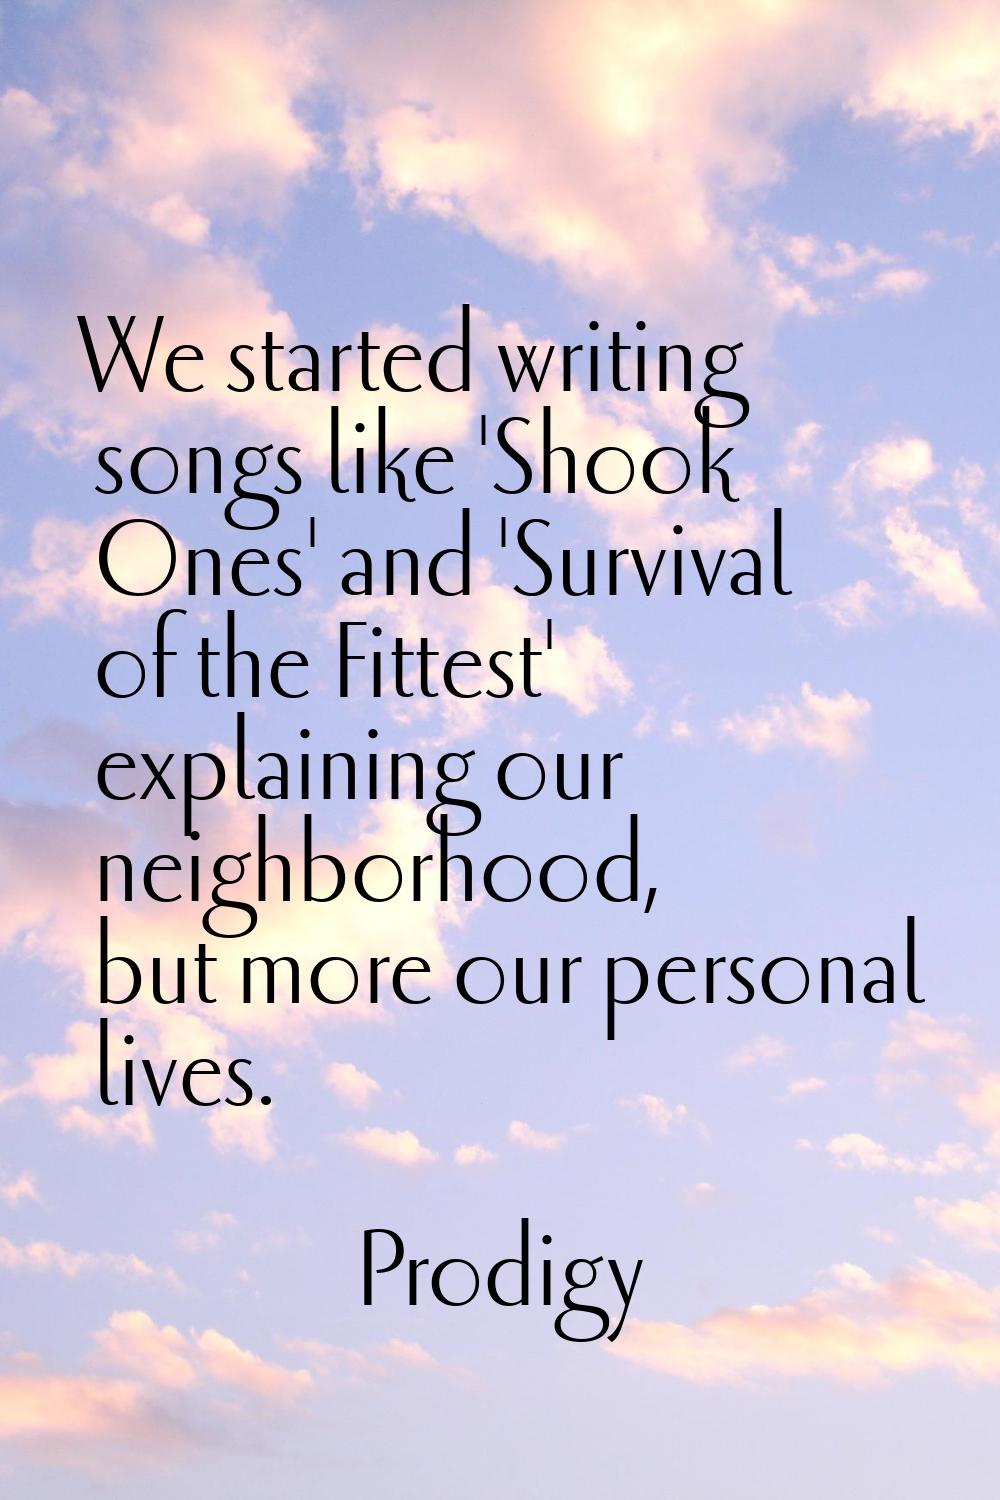 We started writing songs like 'Shook Ones' and 'Survival of the Fittest' explaining our neighborhoo